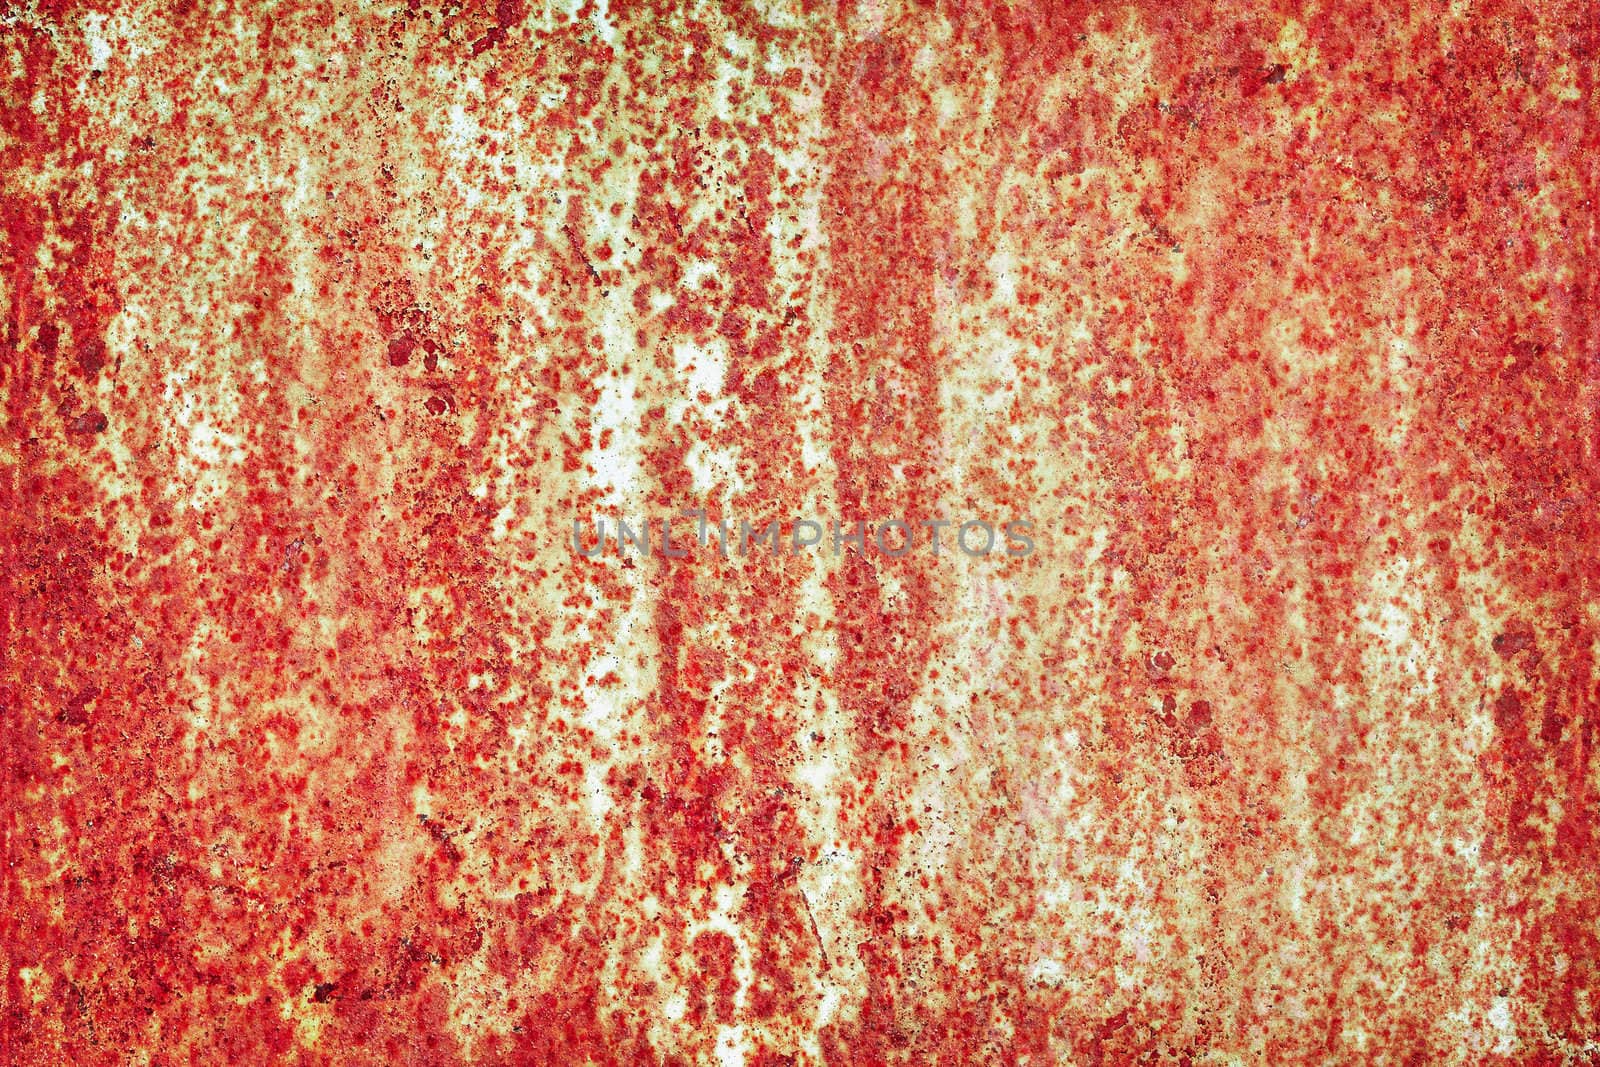 Rusty surface of steel sheet - grunge industrial texture